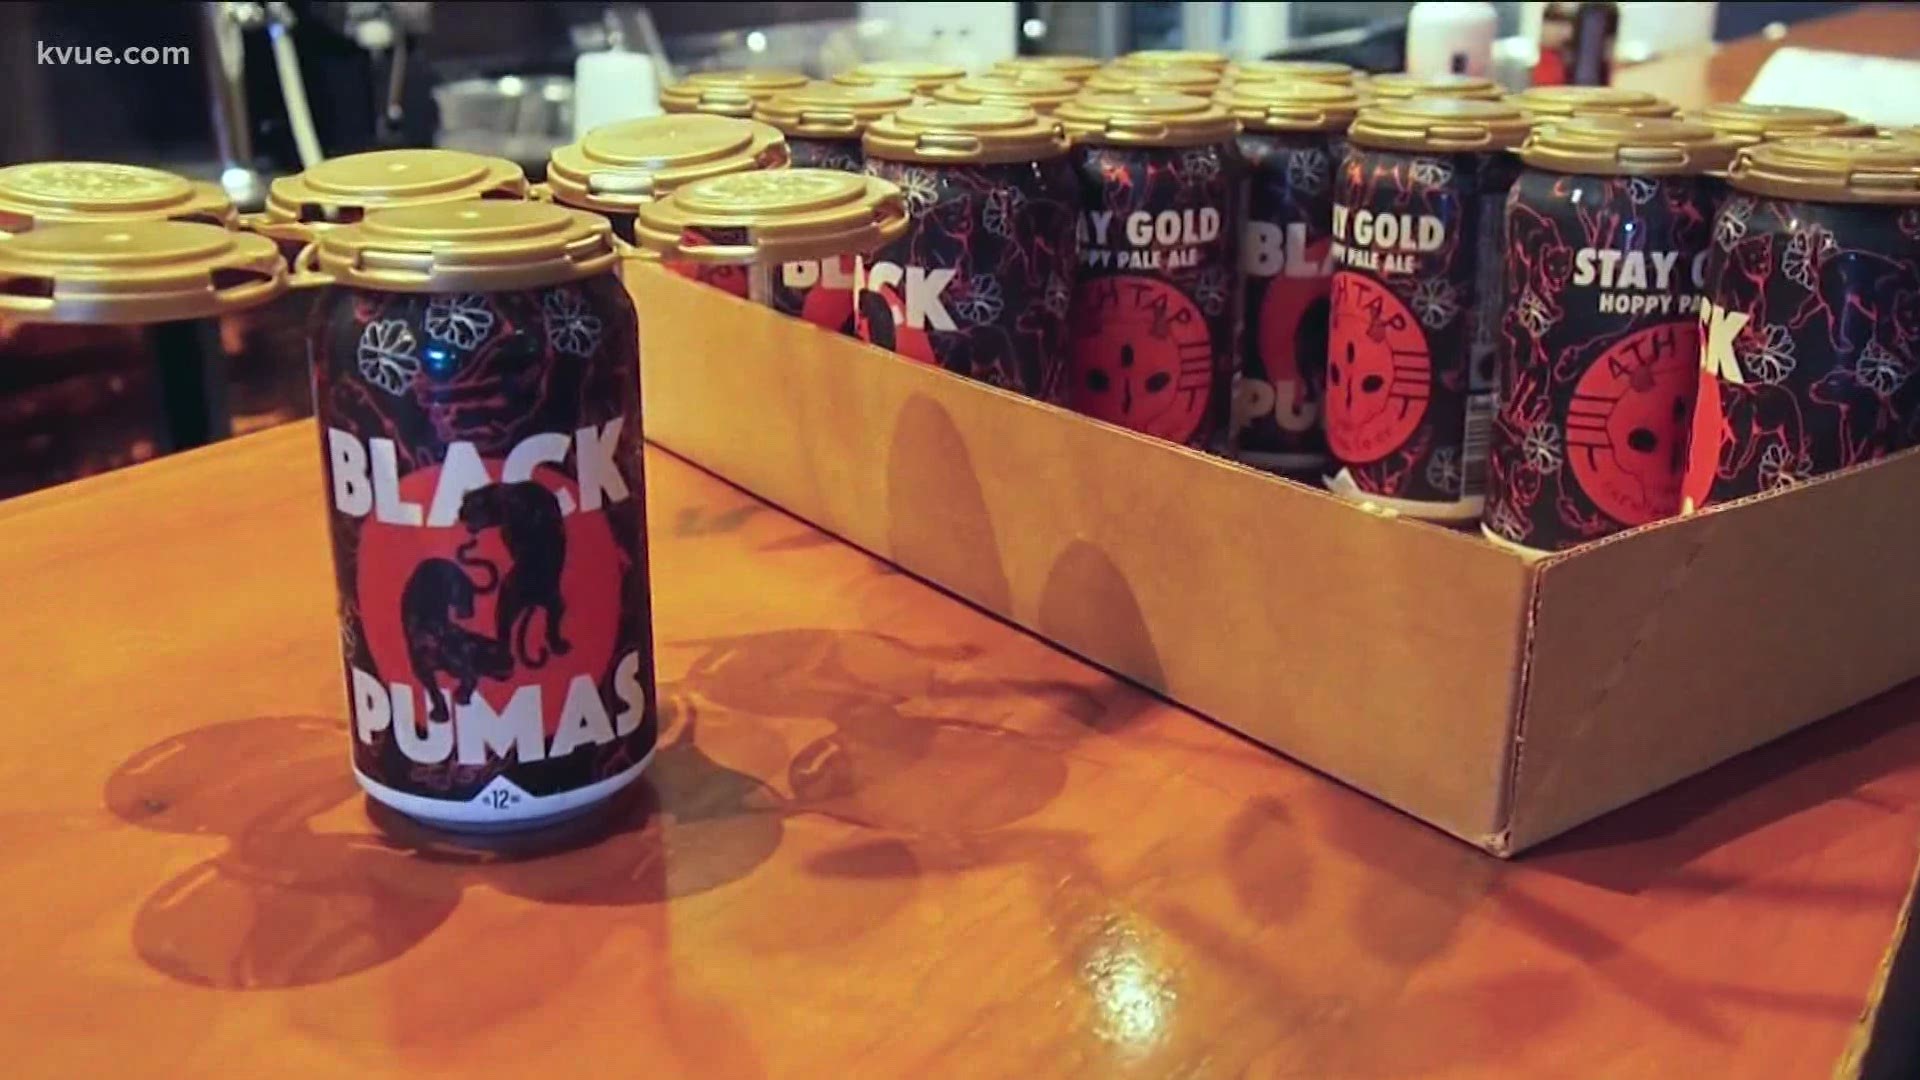 Now you can pop a can of Black Pumas beer while giving back to a few local organizations.